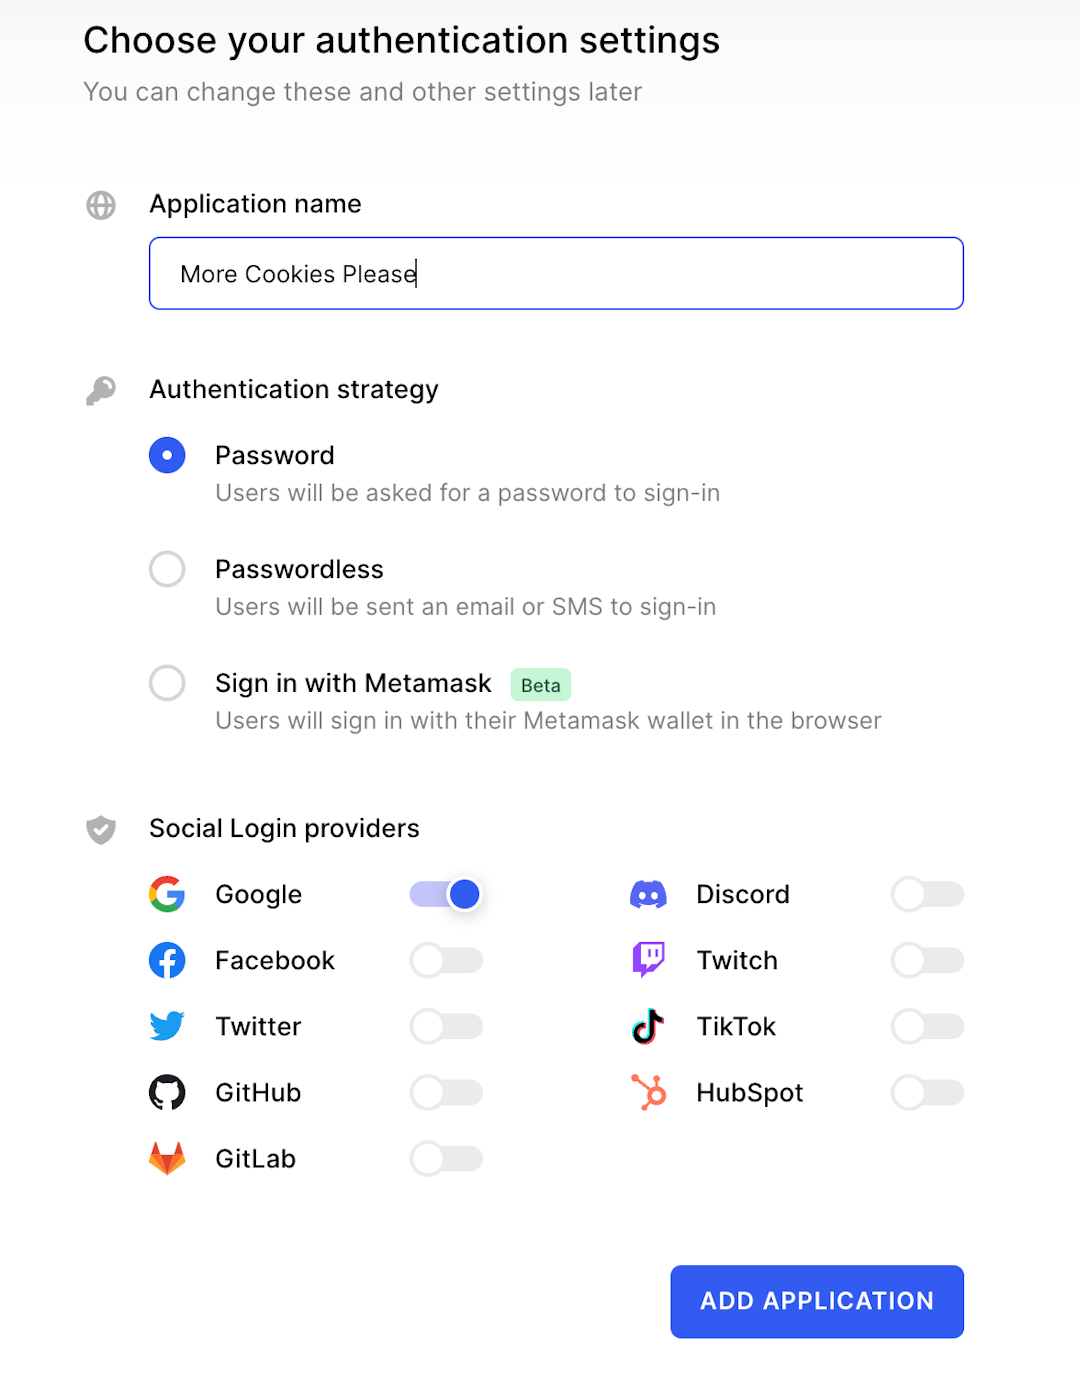 Choose your authentication settings